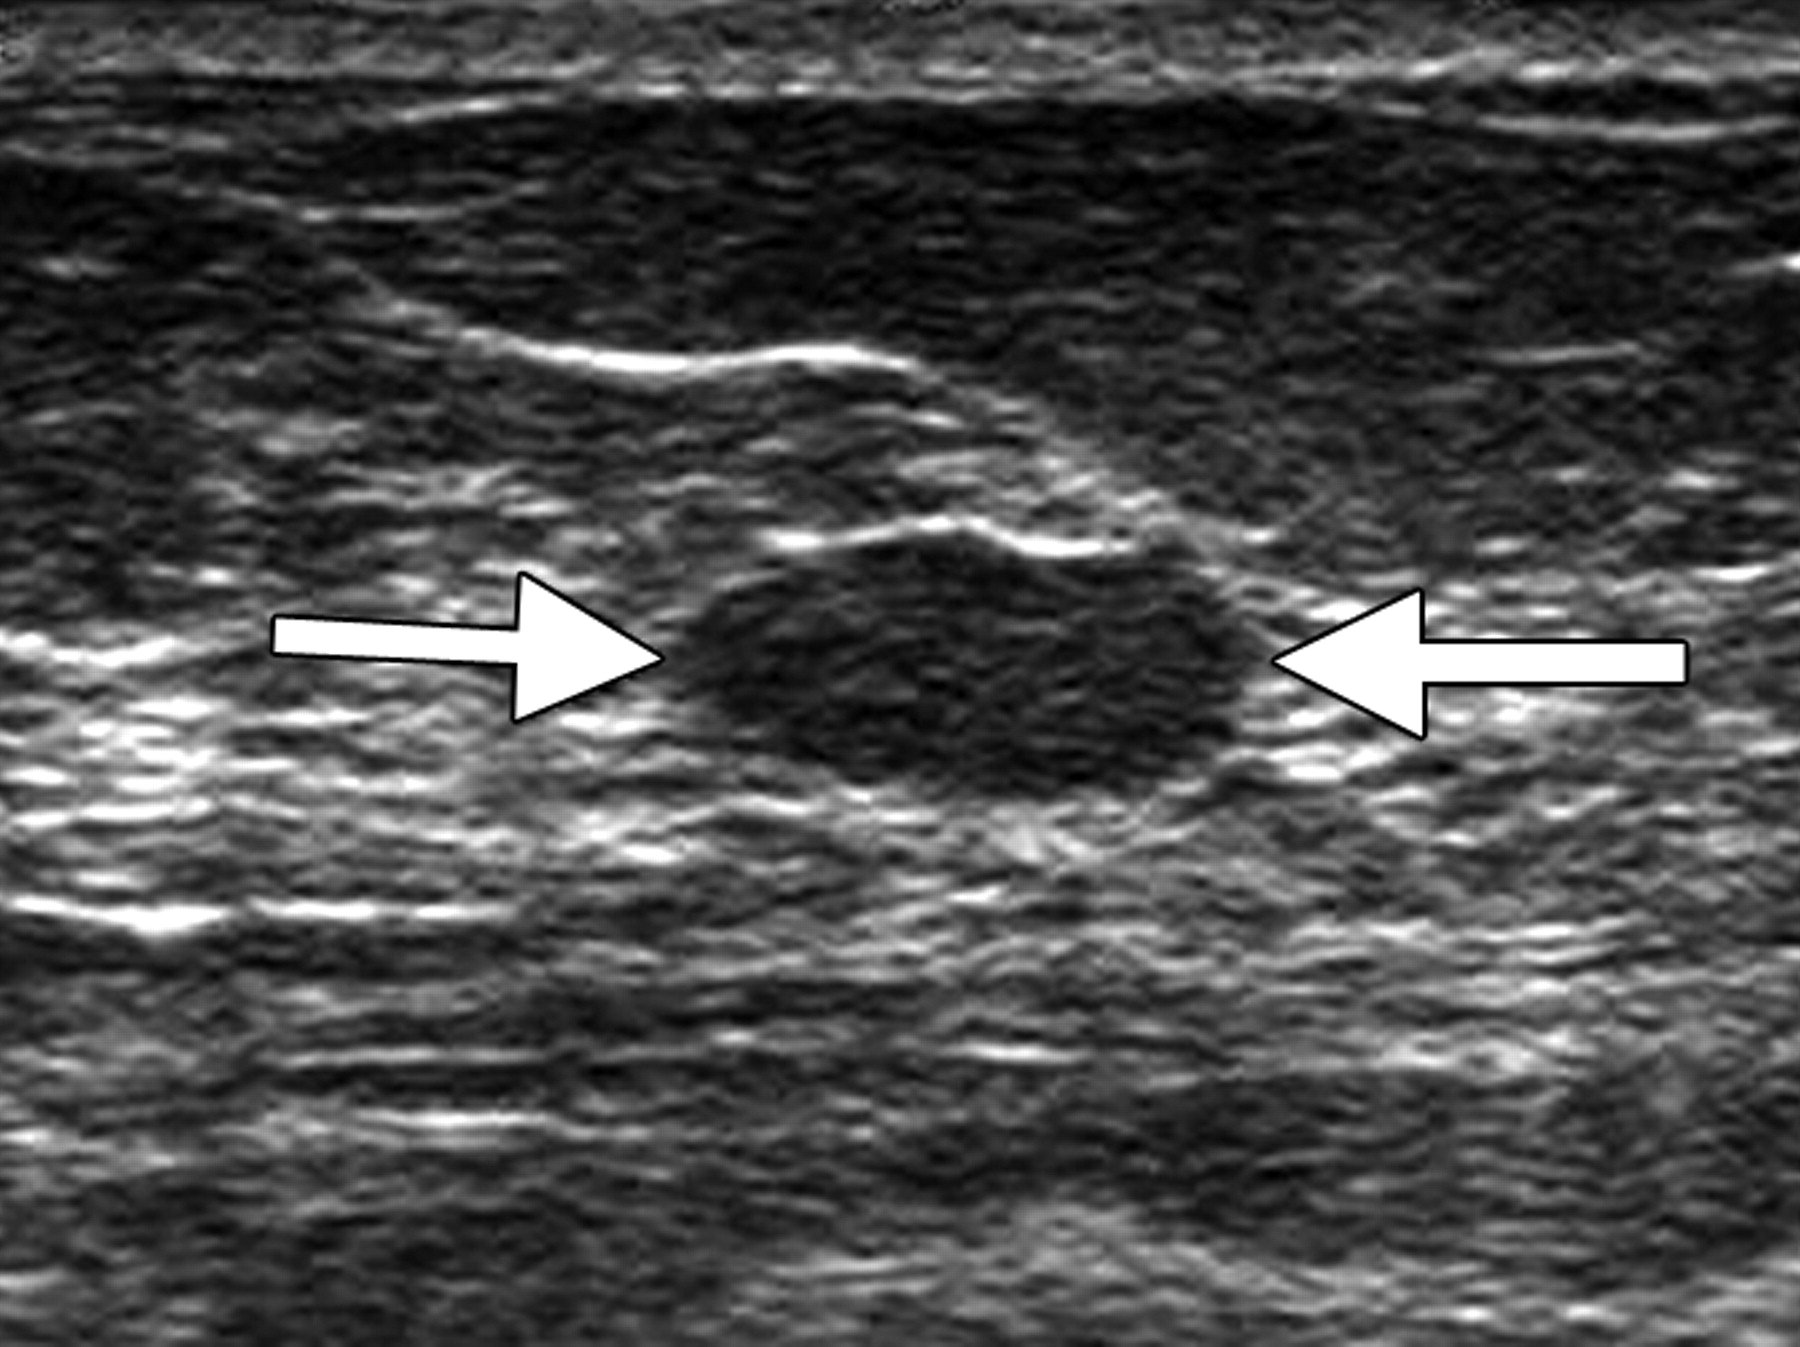 RSNA press release: Annual Screening with Breast Ultrasound or MRI Could Benefit Some Women